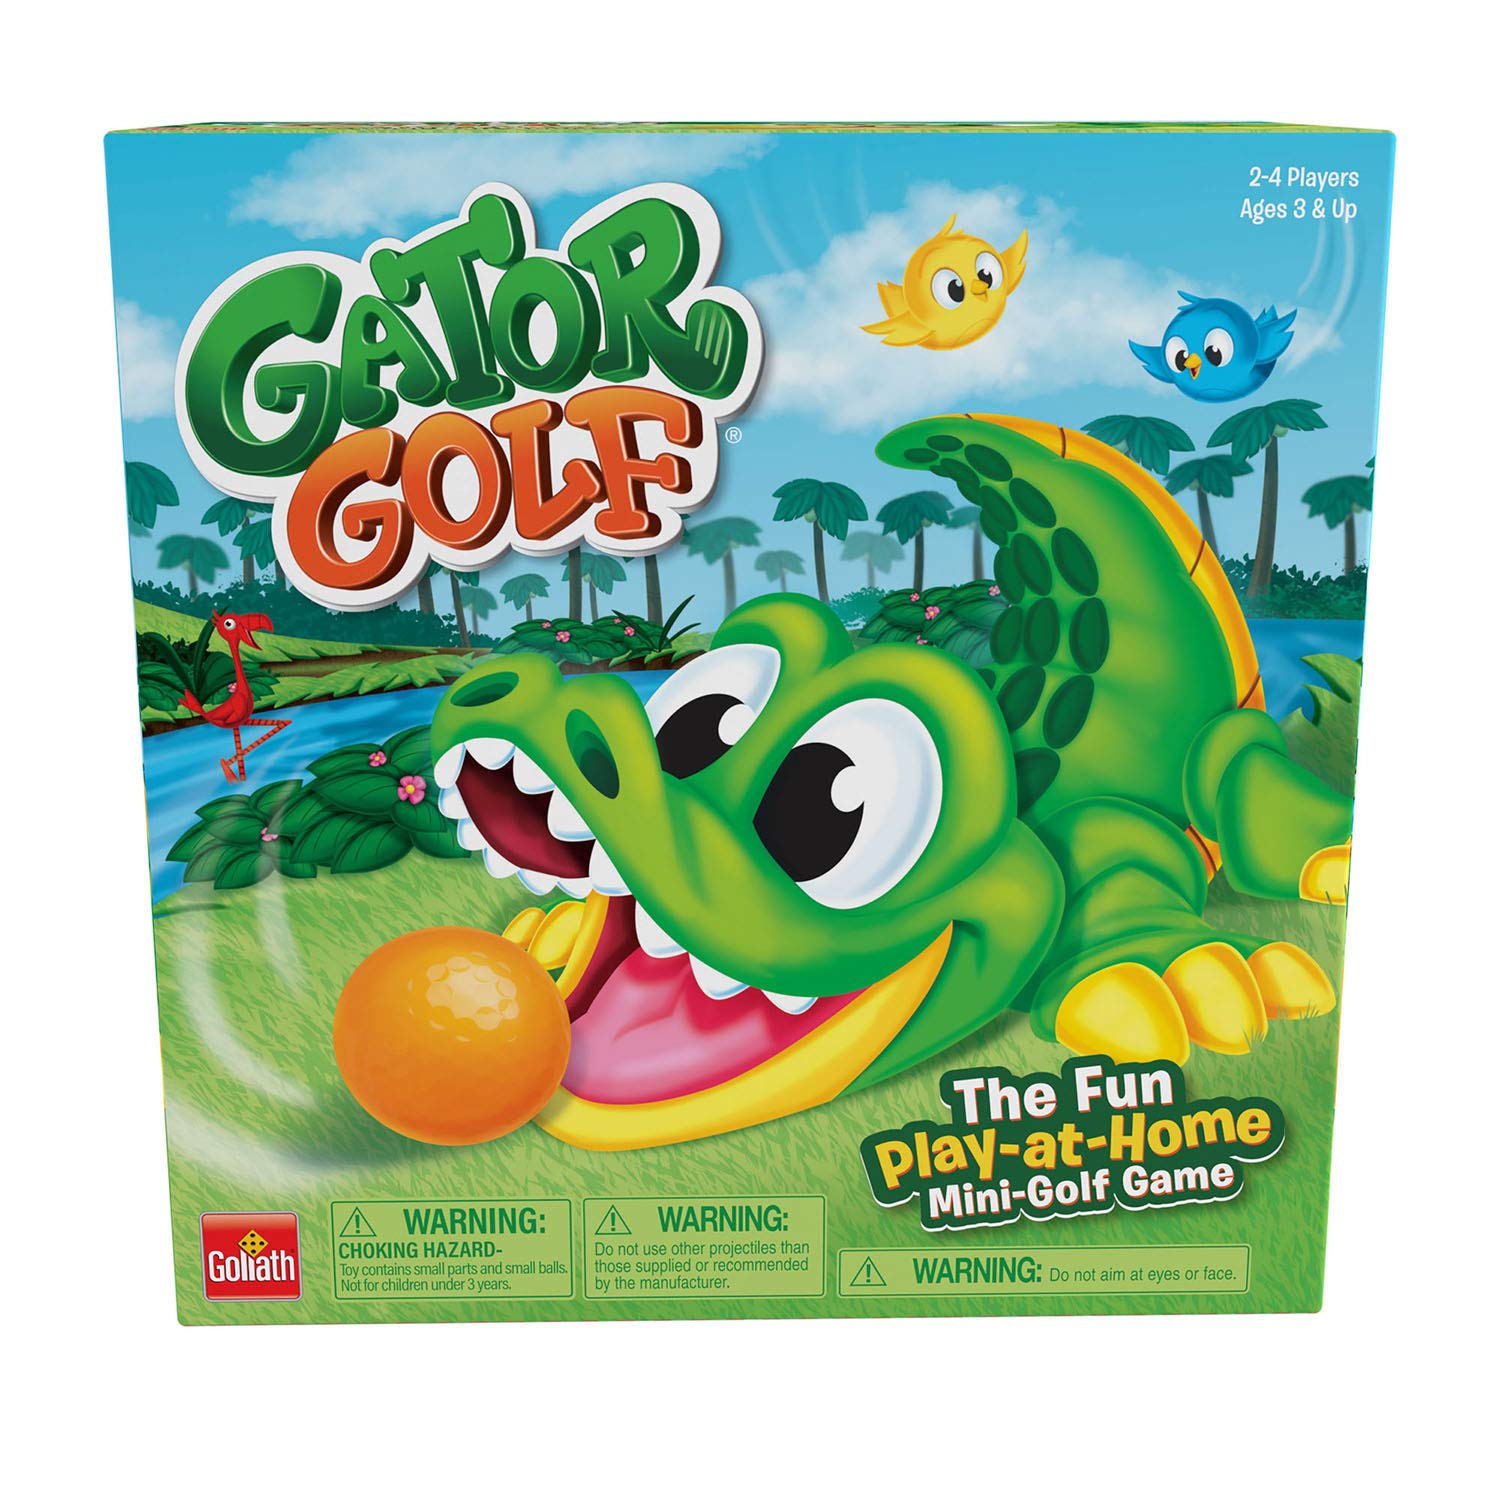 Gator Golf - Putt The Ball into The Gator's Mouth to Score Game by Goliath